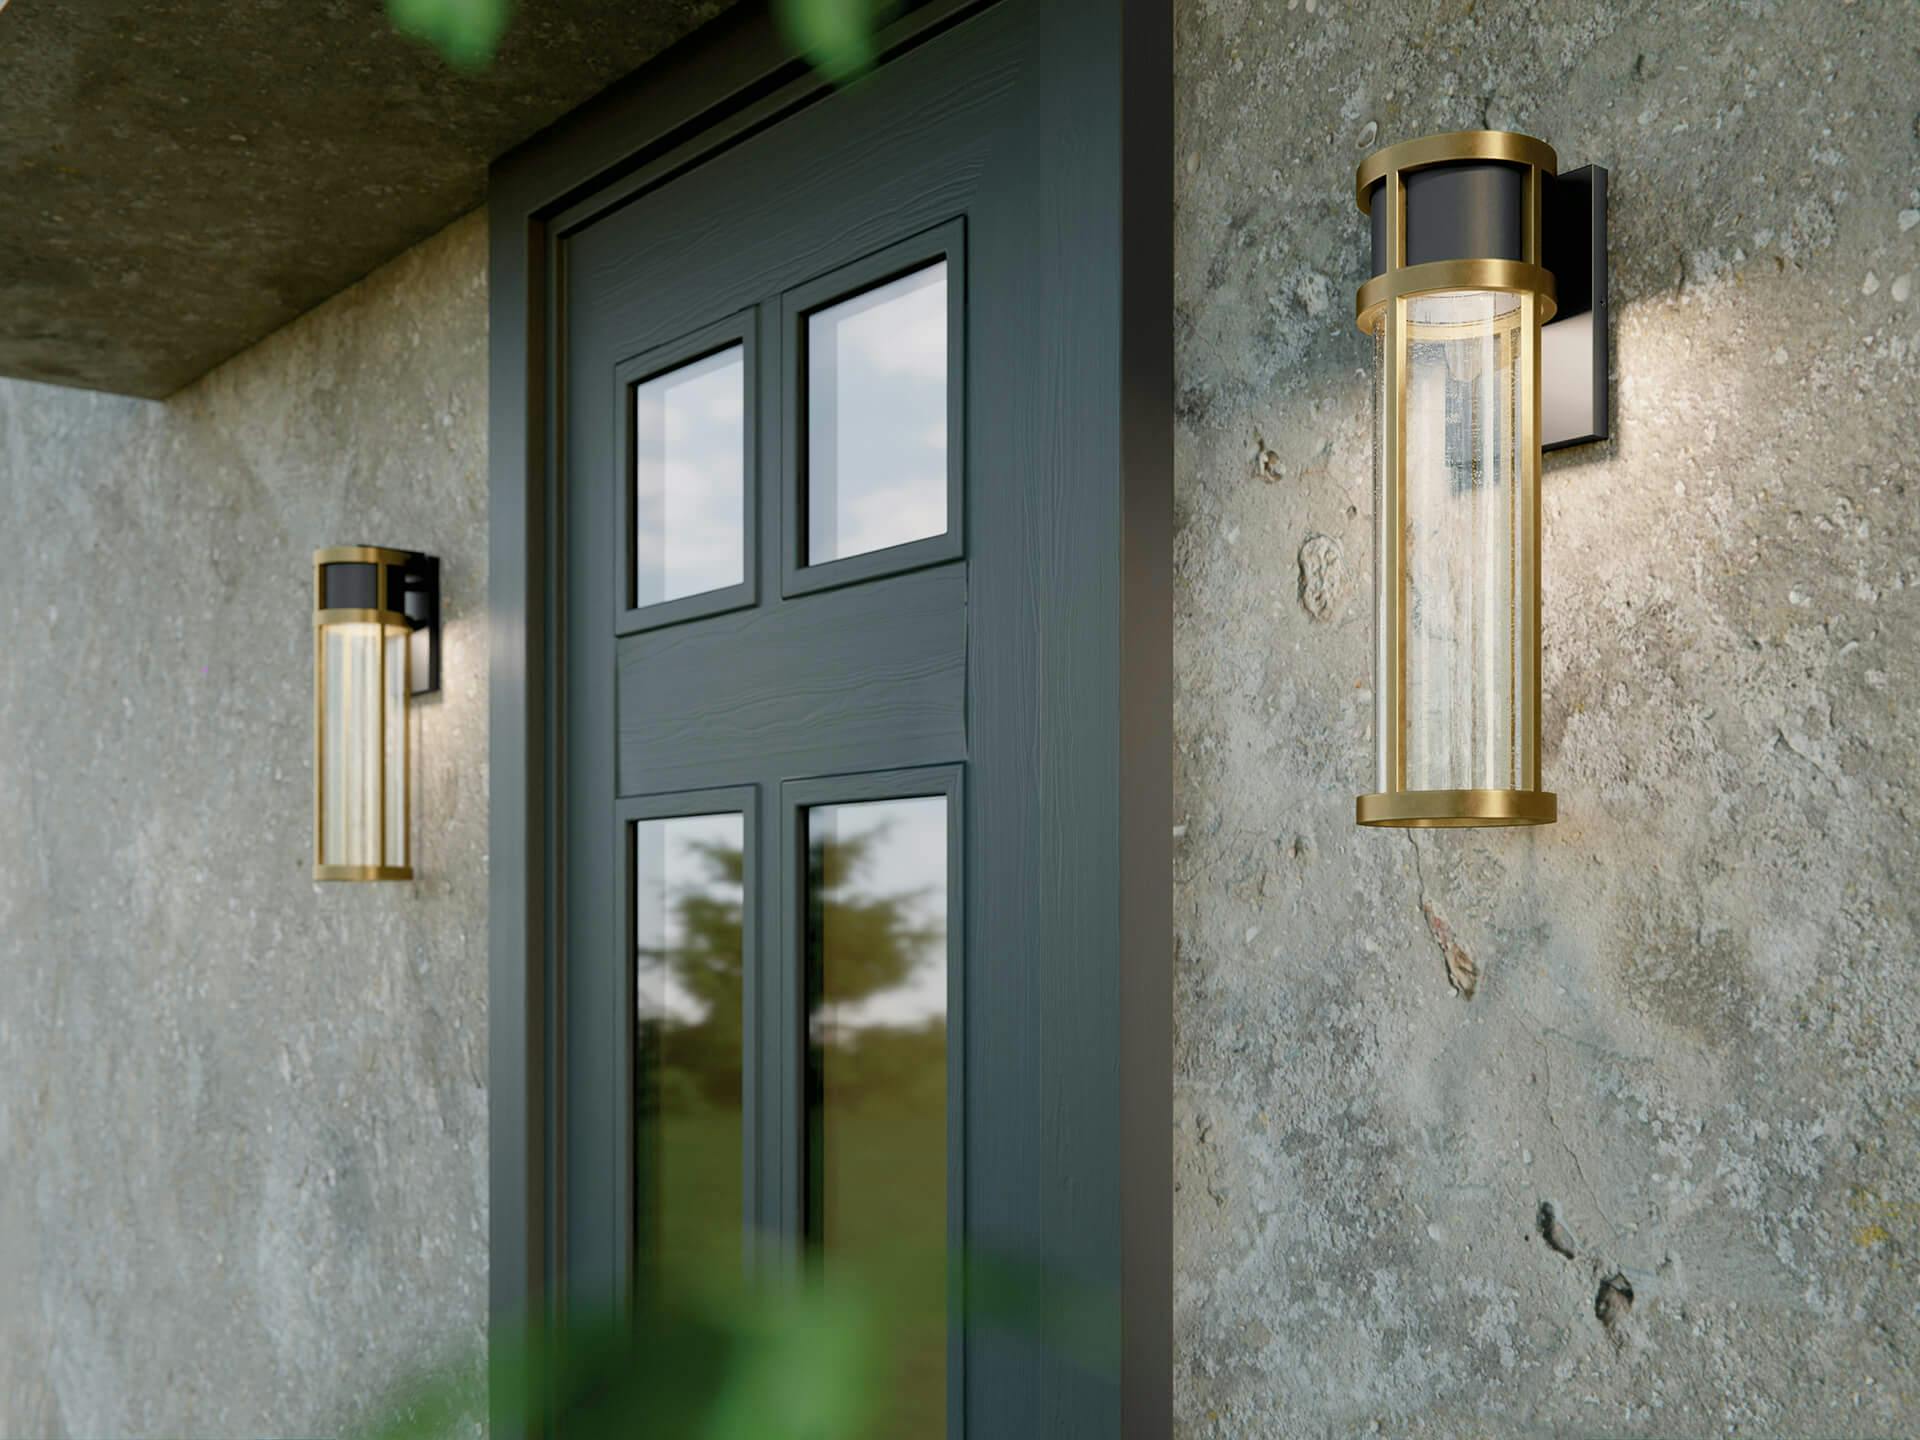 Two camillo black and gold wall sconces outside of an exterior entryway